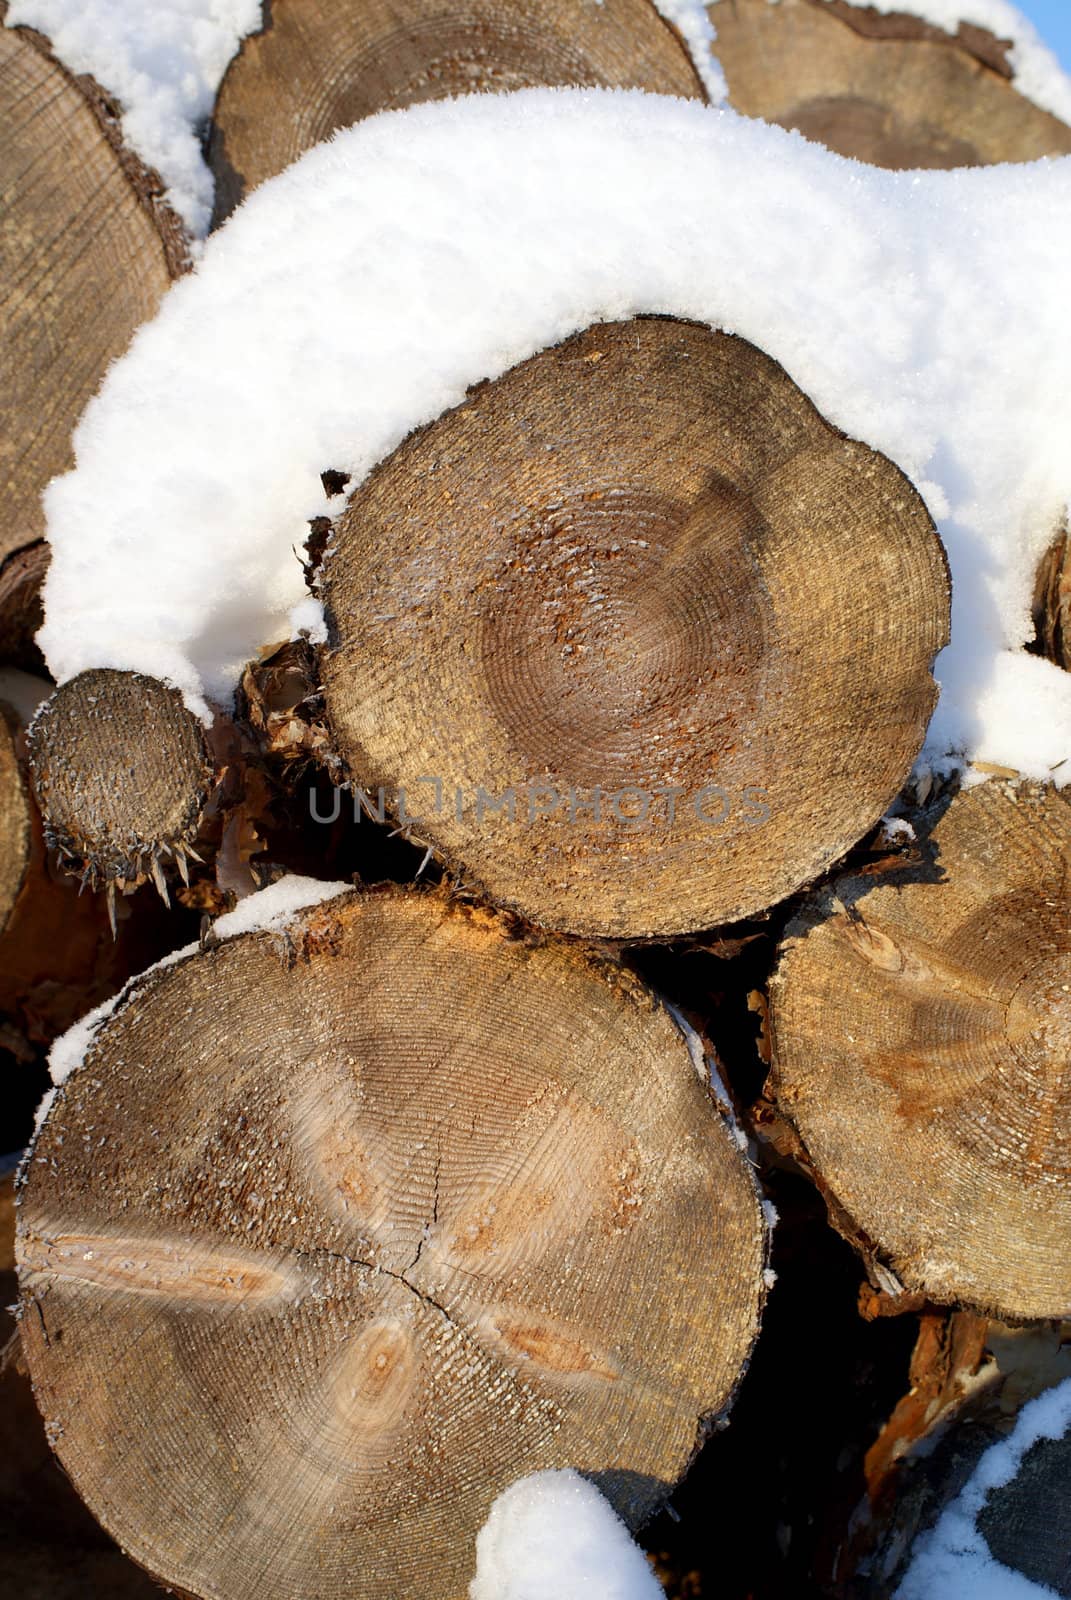 A closeup of cut and stacked pine logs under snow, showing the annual growth rings. Vertical view. Suitable for backgrounds. Photographed in Salo, Finland 2010.